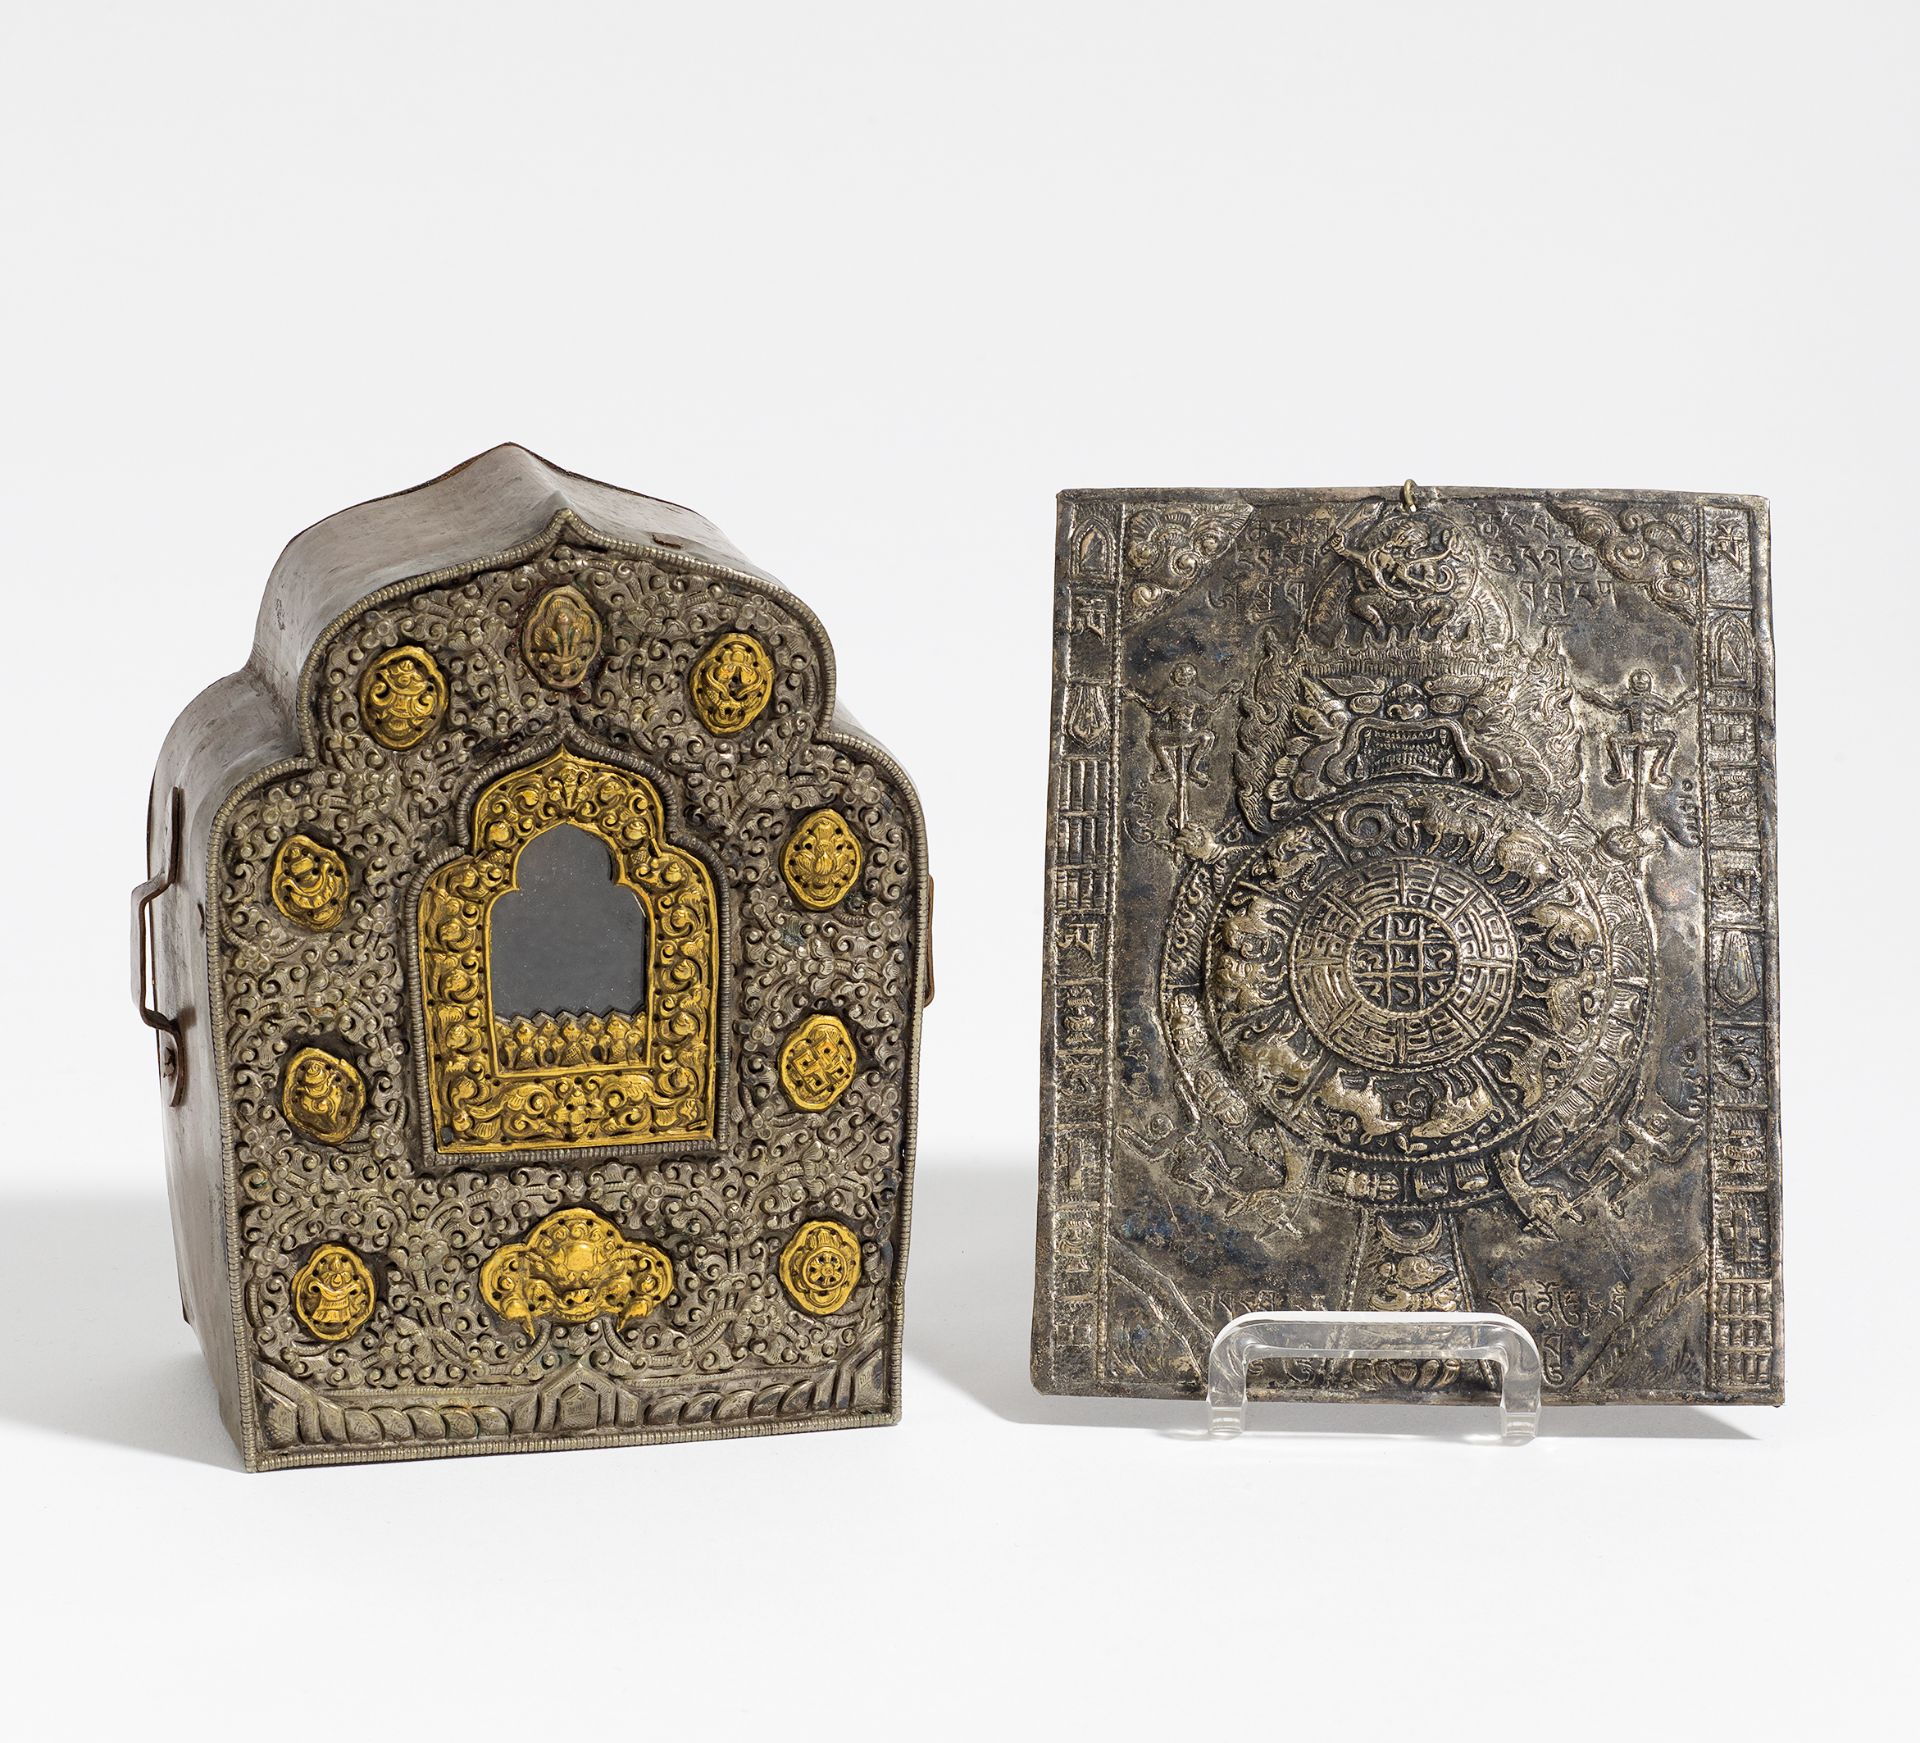 TRAVEL SHRINE (GA U). Tibet. 19th/20th c. Front plate from silvery and golden bronze. Box from